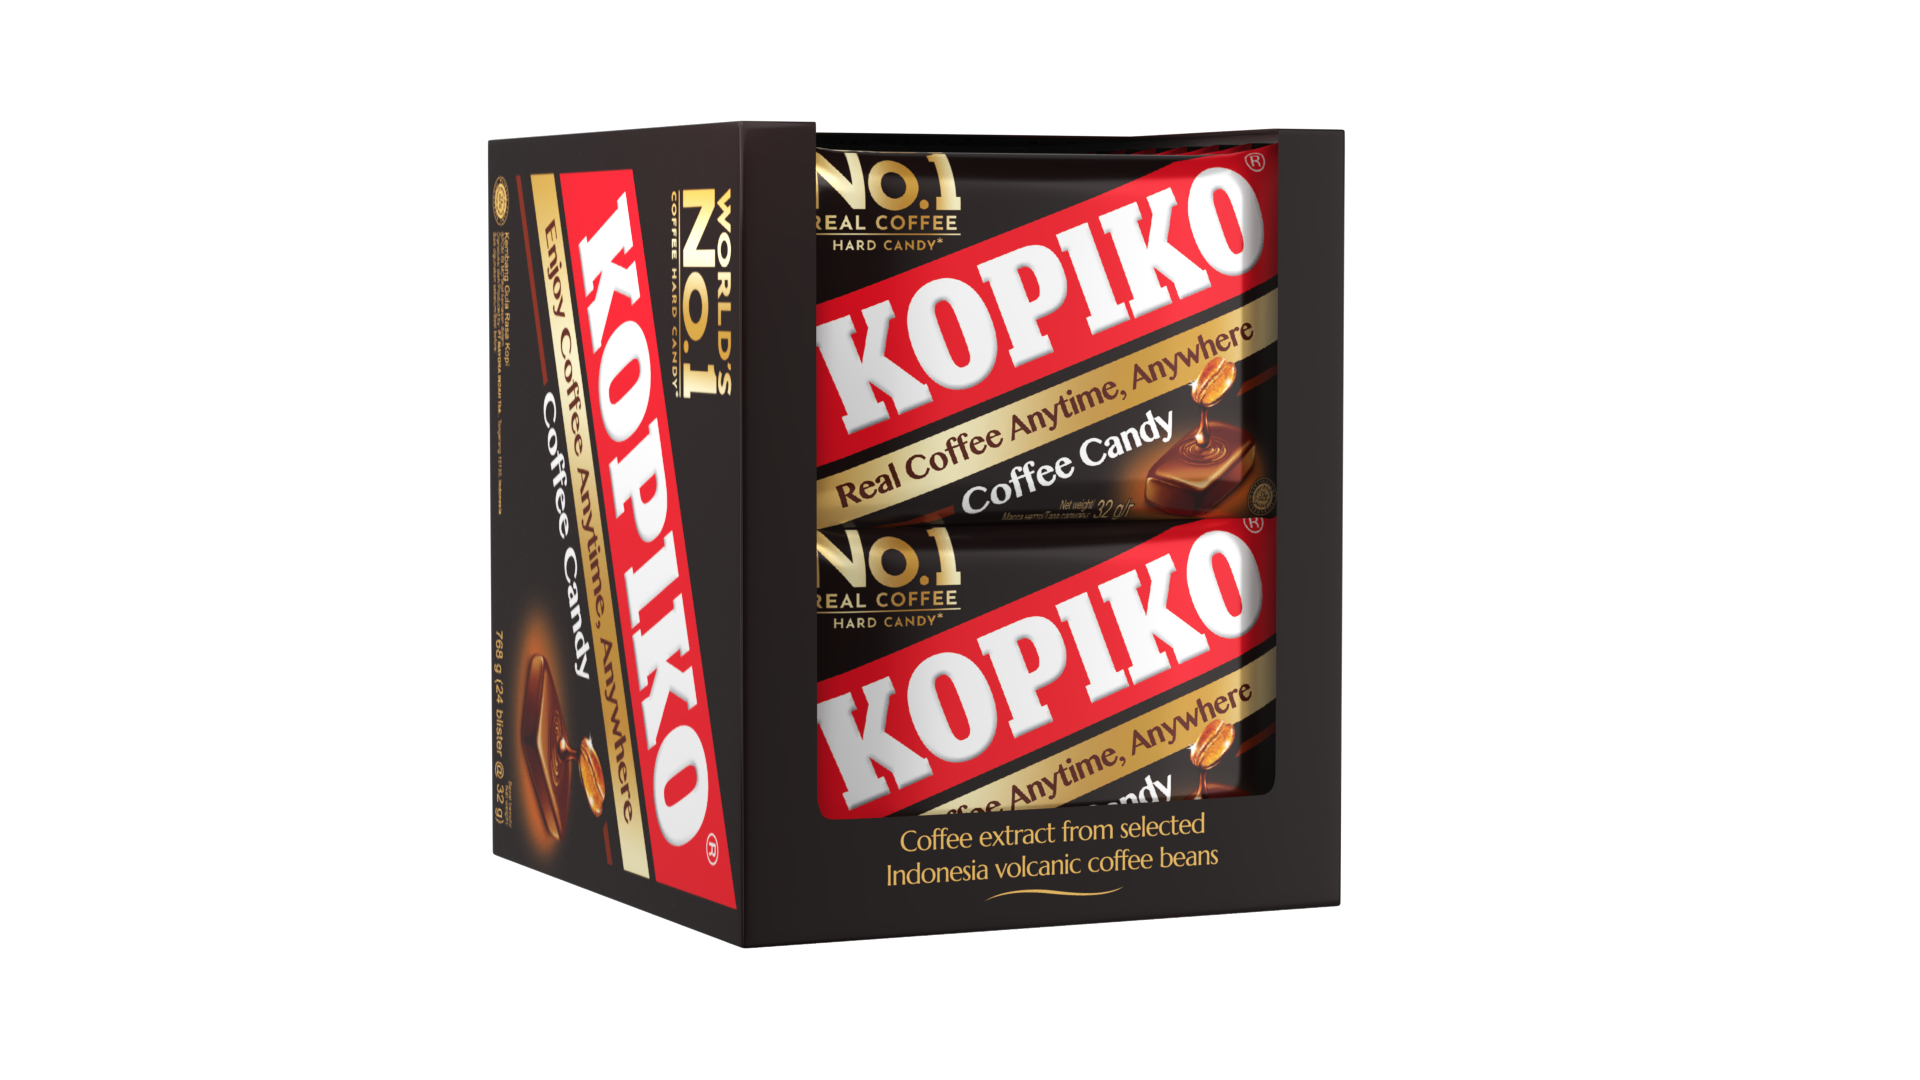 Kopiko World's #1 Hard coffee candy. Made of real coffee. Real coffee anytime, anywhere. Display box with blister packs front facing.